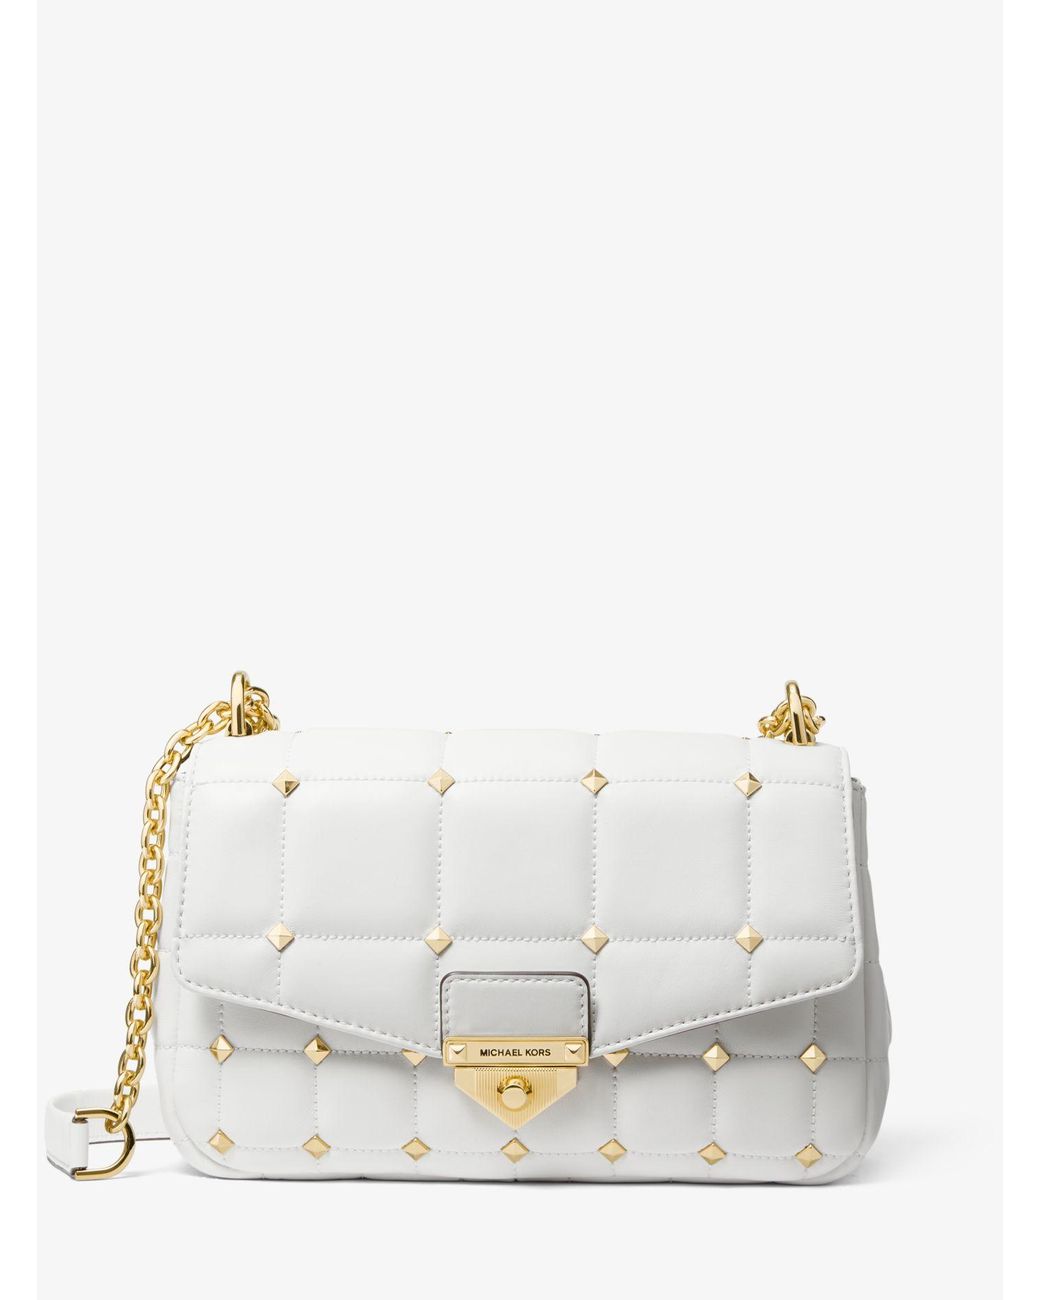 Michael Kors Soho Large Studded Quilted Leather Shoulder Bag in White ...